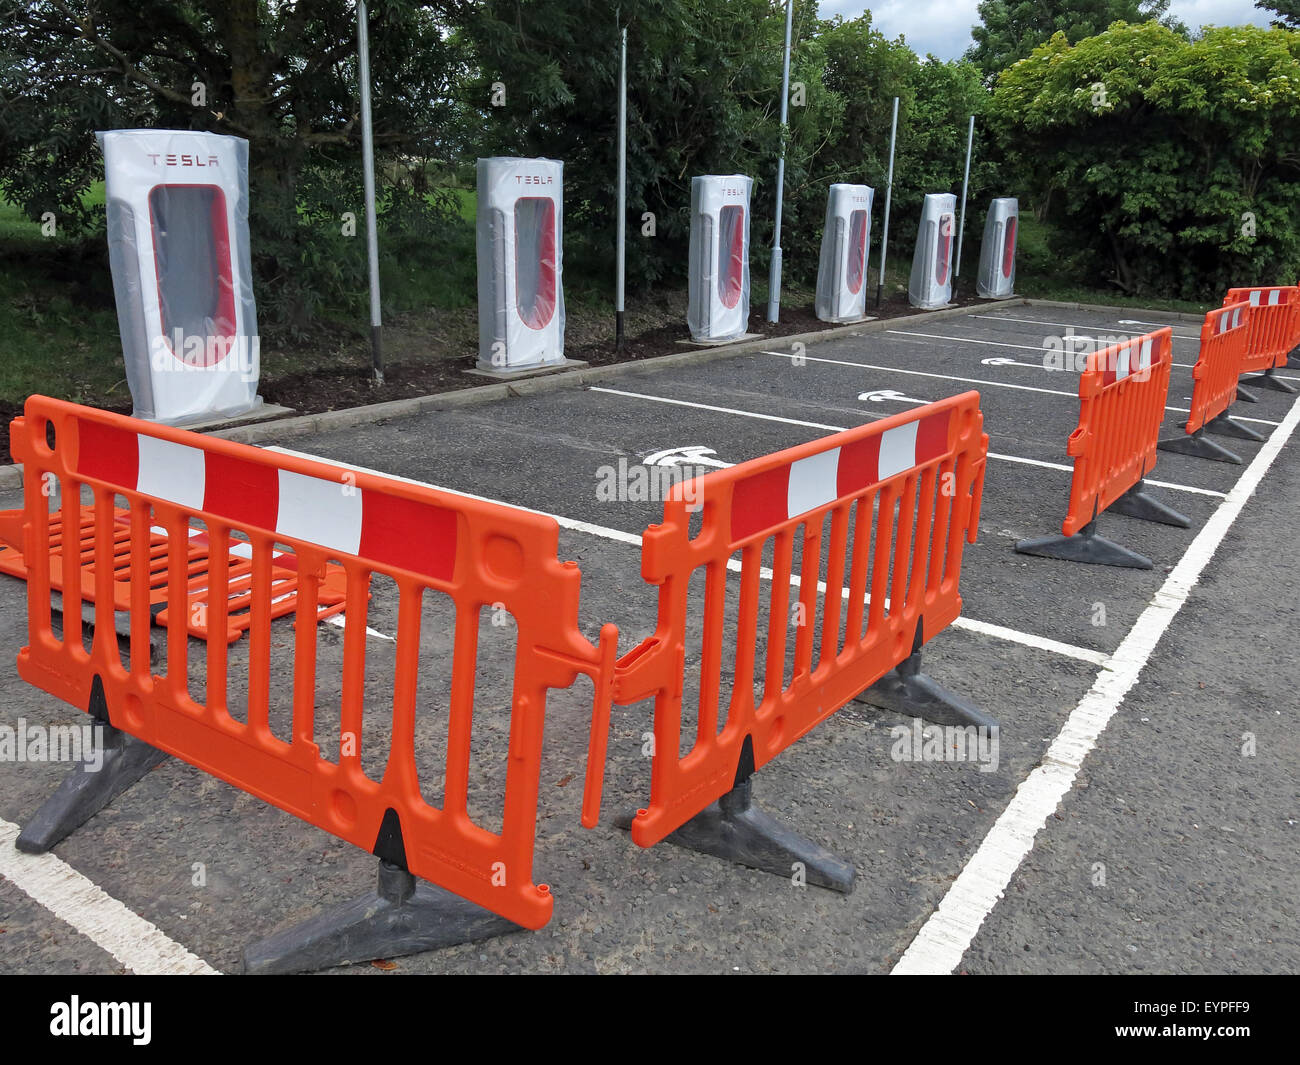 Tesla charging points being implemented on a motorway service area in the UK, with barriers around Stock Photo